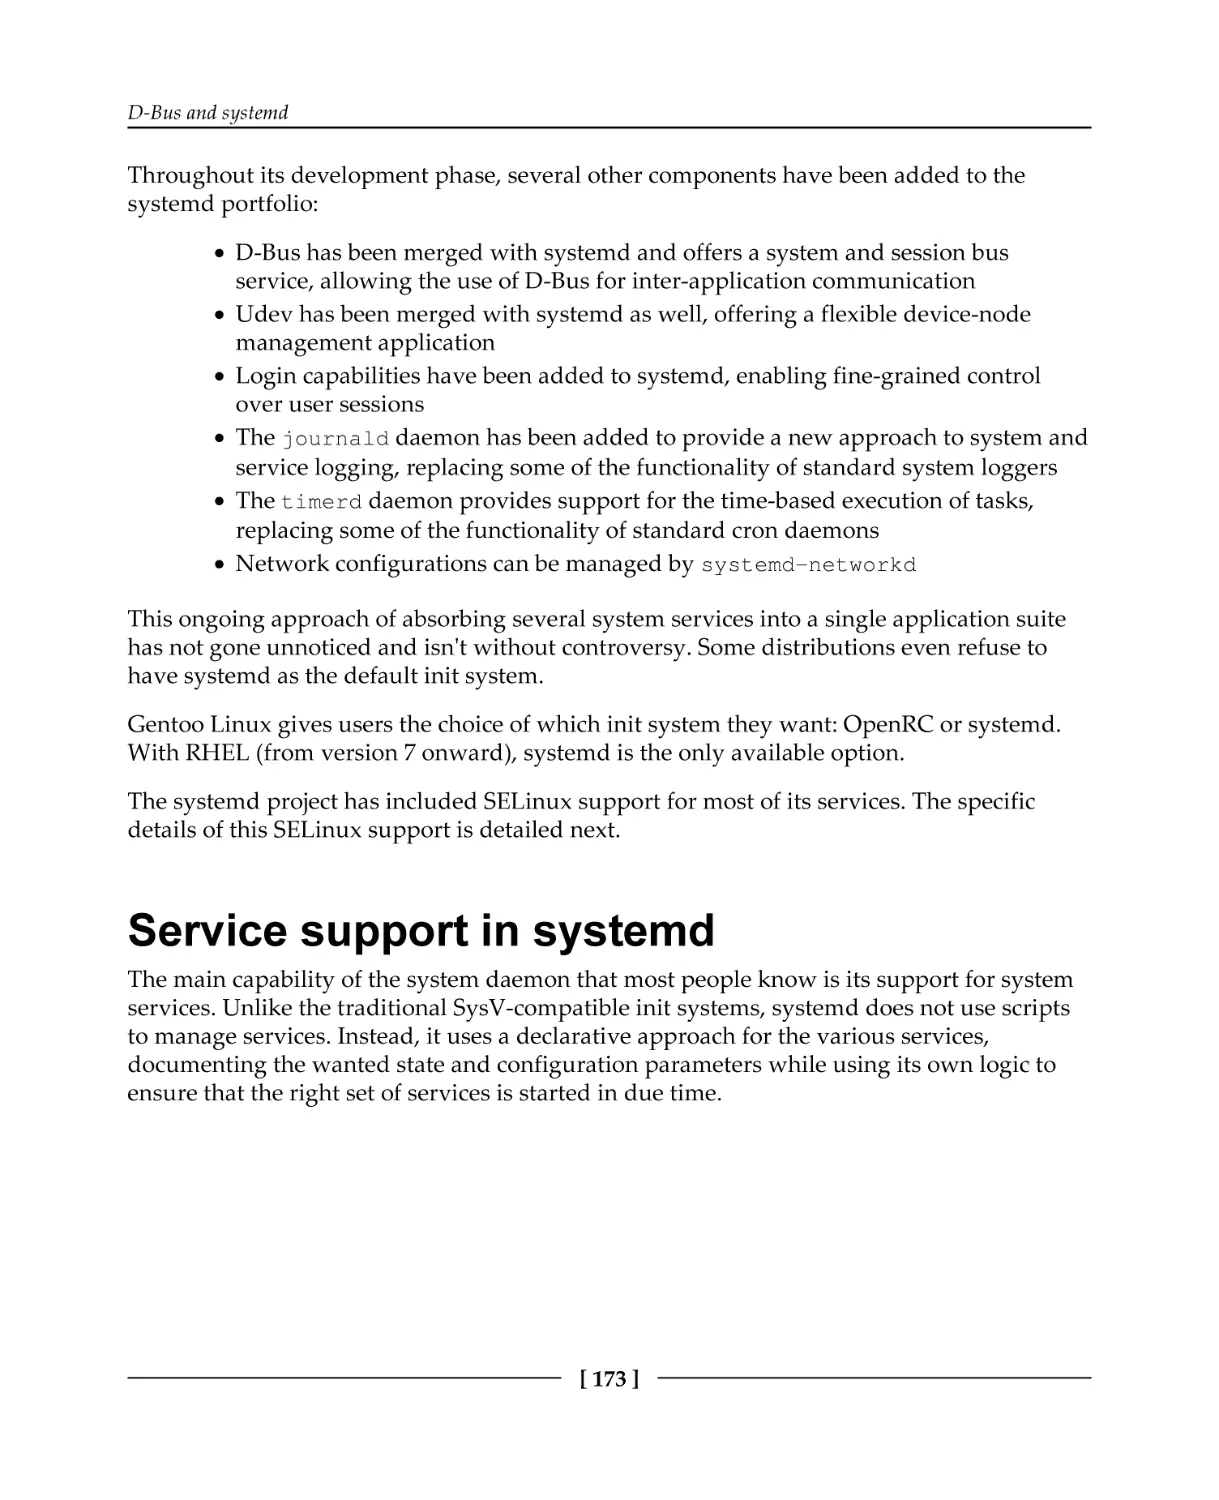 Service support in systemd